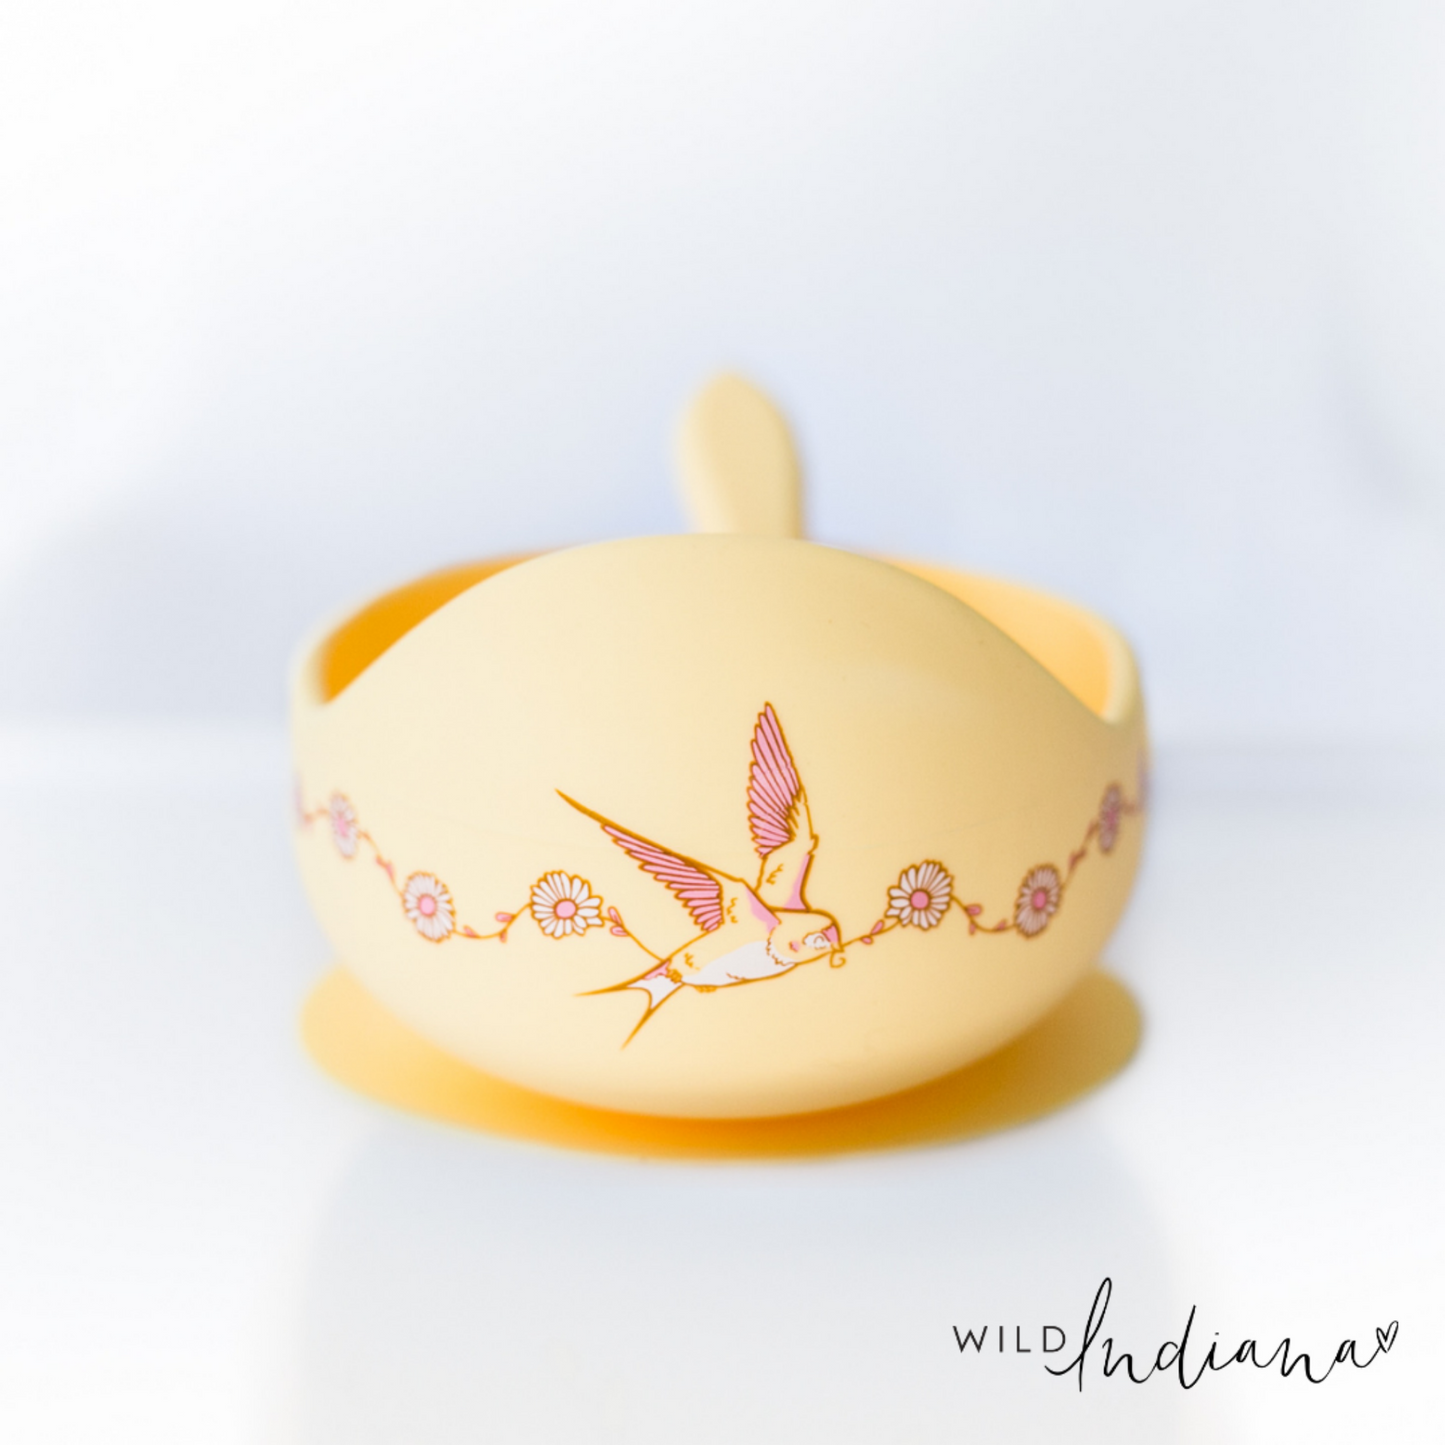 WILD INDIANA - LIMITED EDITION Silicone Bowl Set | DAISY